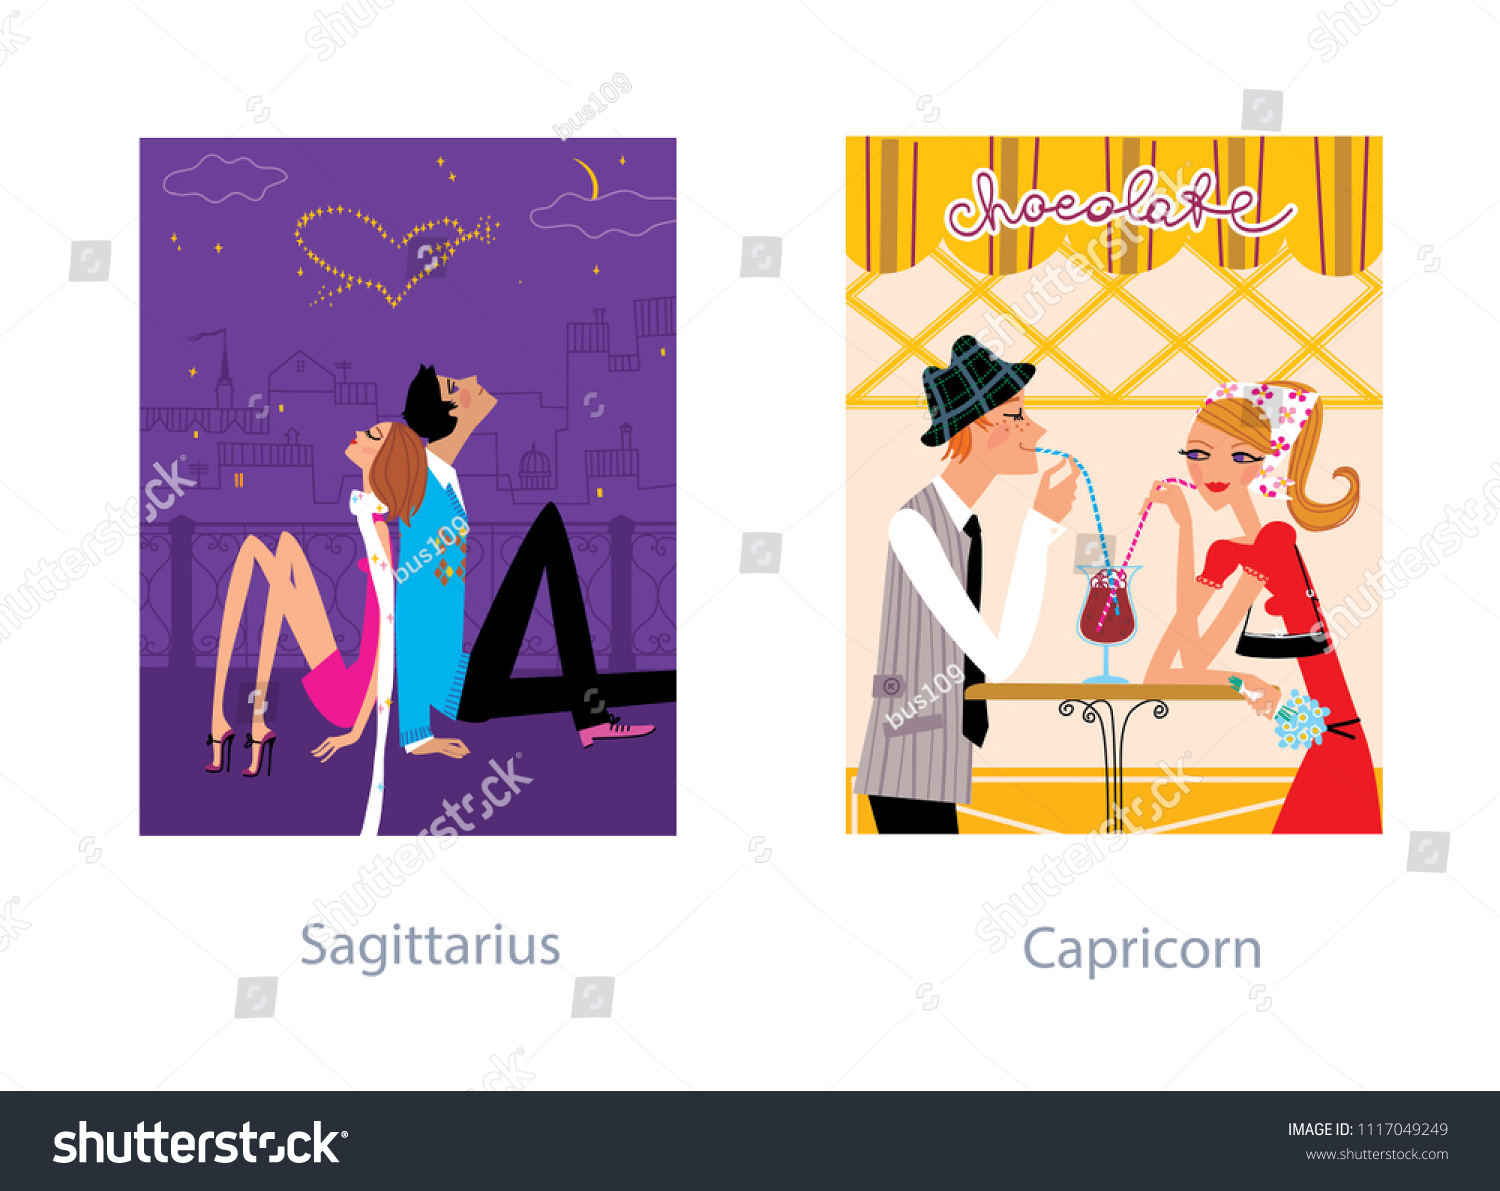 The signs love horoscope